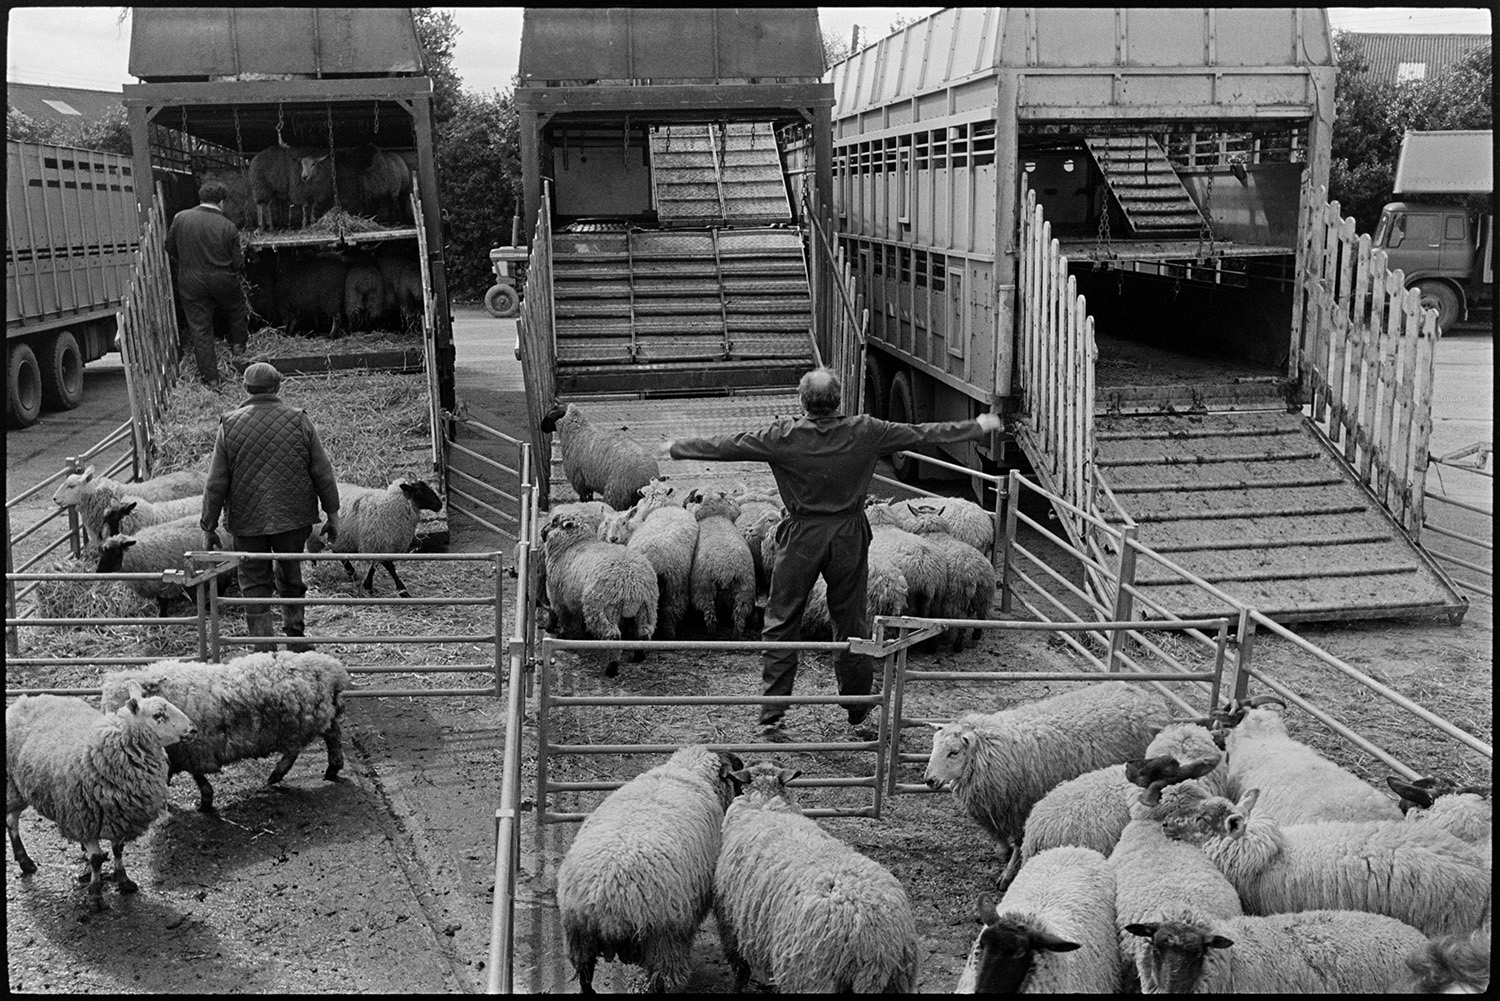 Sheep being loaded and unloaded at market. Lorries parked.
[Three men loading sheep into the back of two lorries parked at South Molton market. Sheep are waiting in pens in the foreground. Another lorry is waiting to be loaded next to them. The lorries have three tiers.]